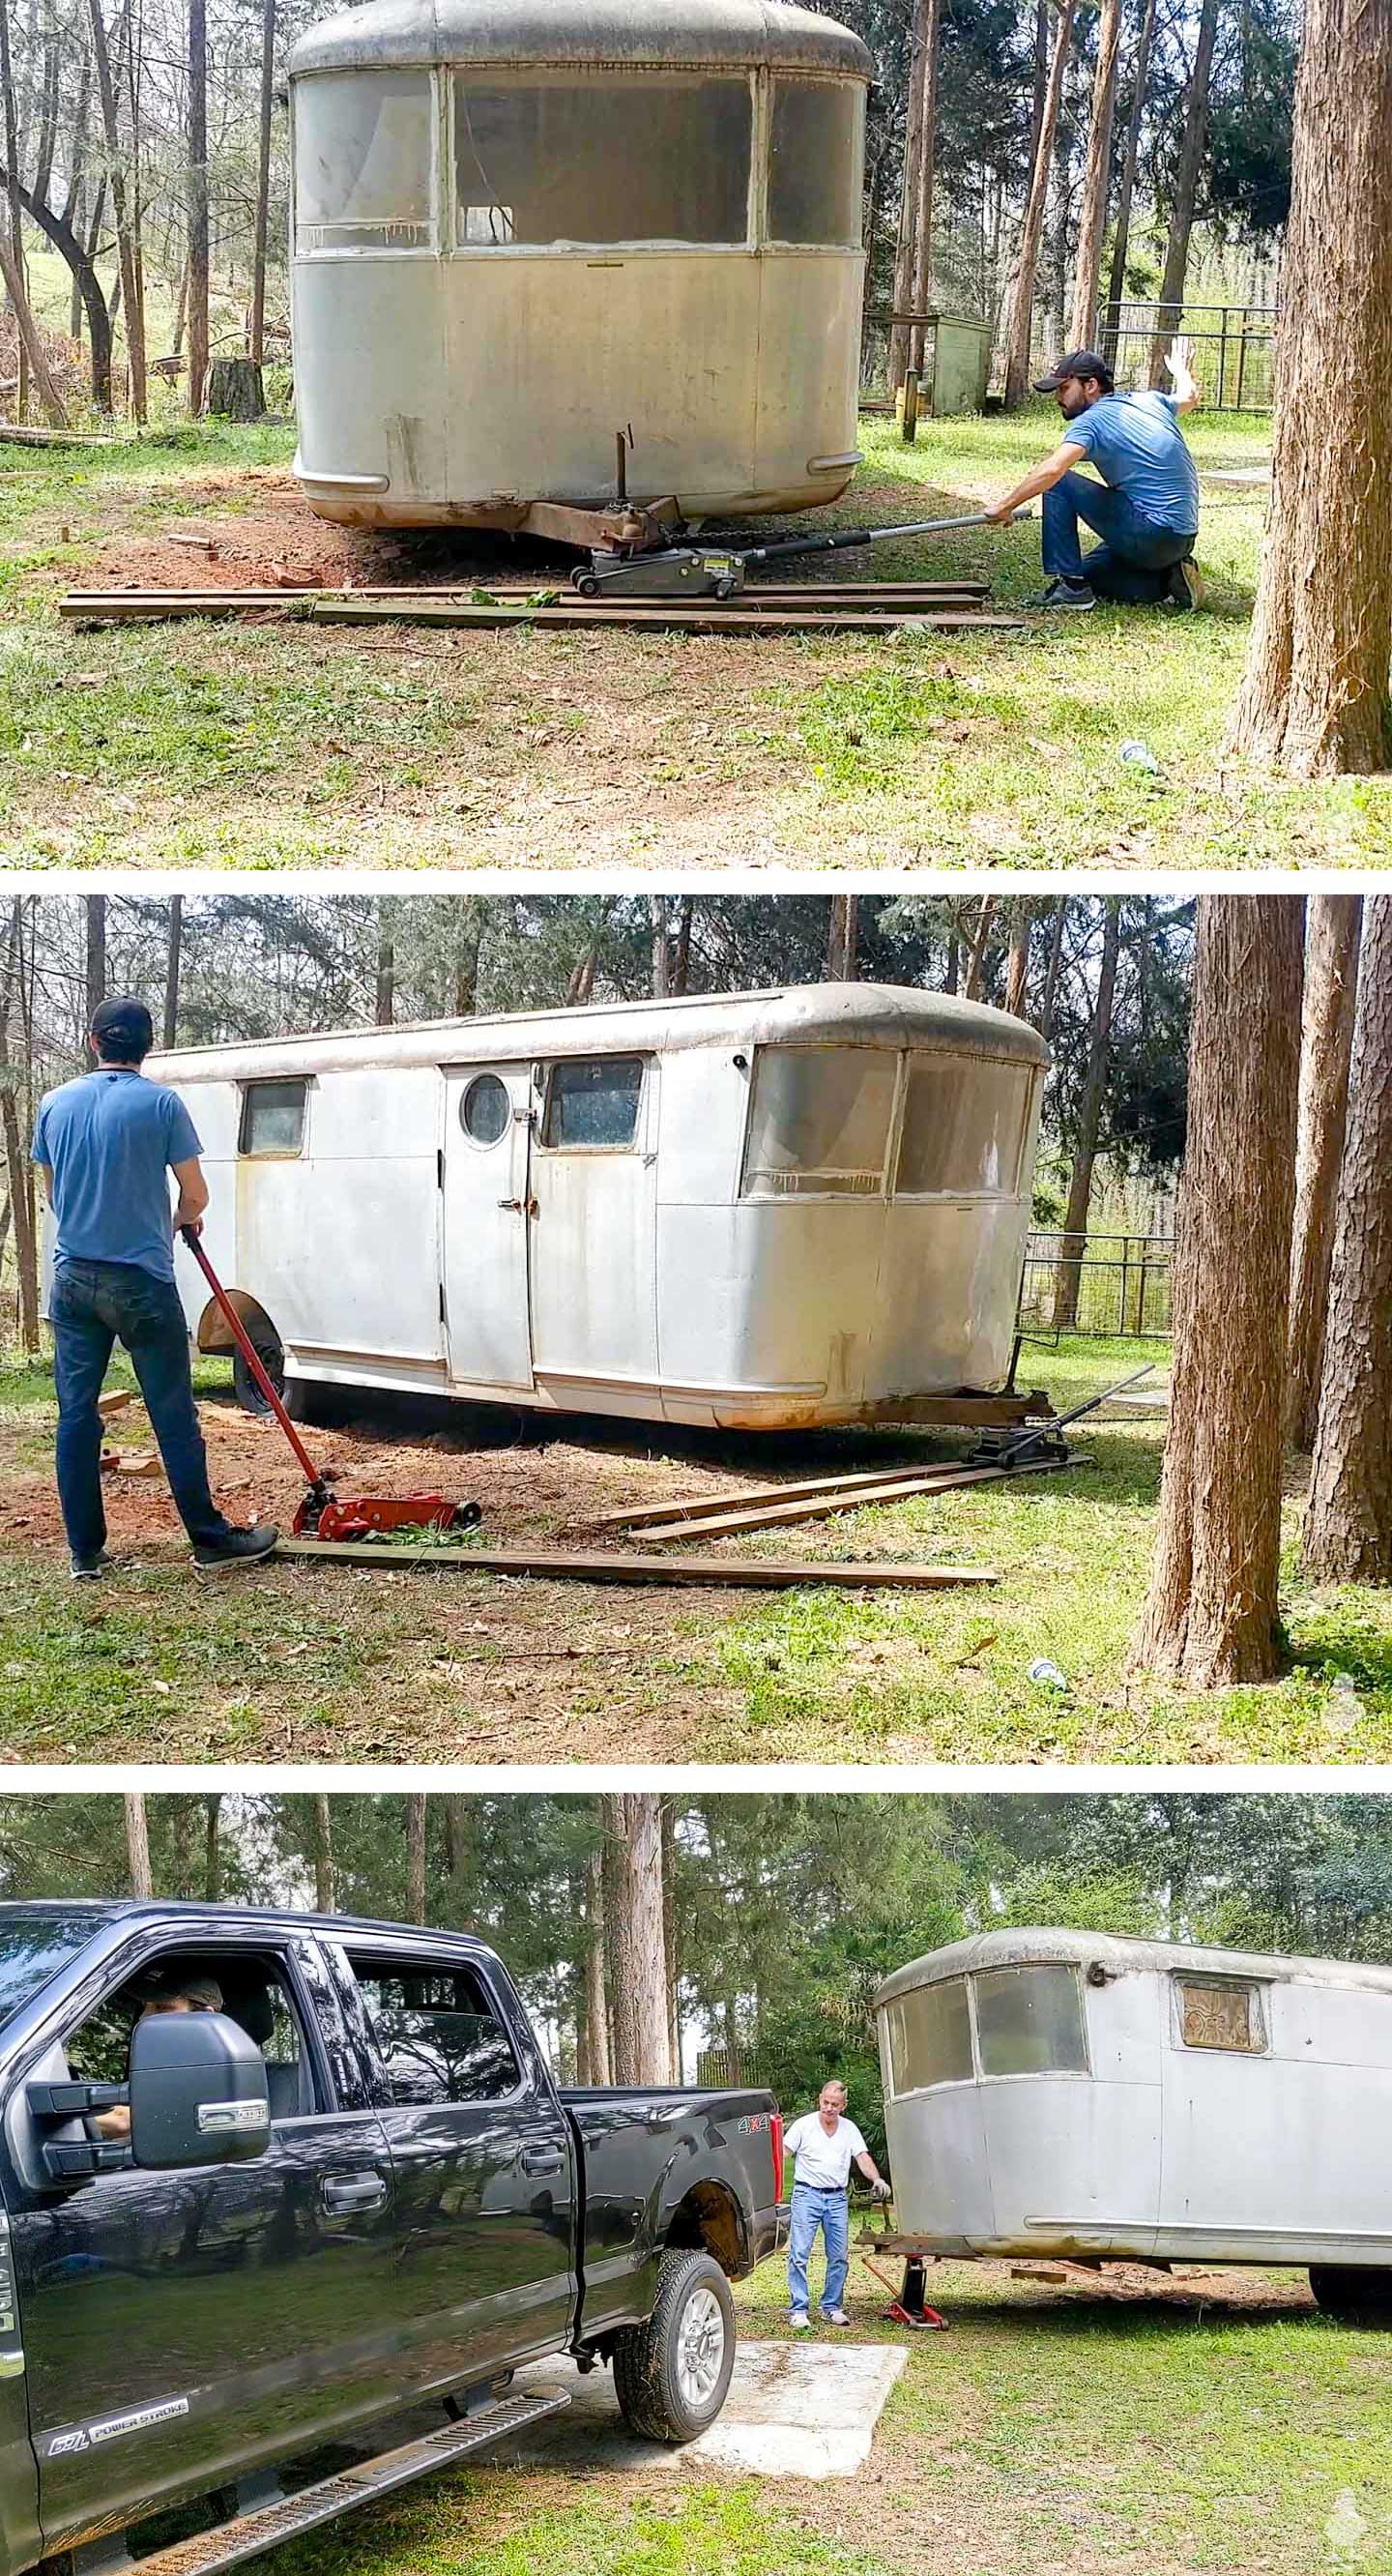 Rubys-Revival-turning-the-camper-around-and-hooking-it-up-to-the-truck how to move an airstream